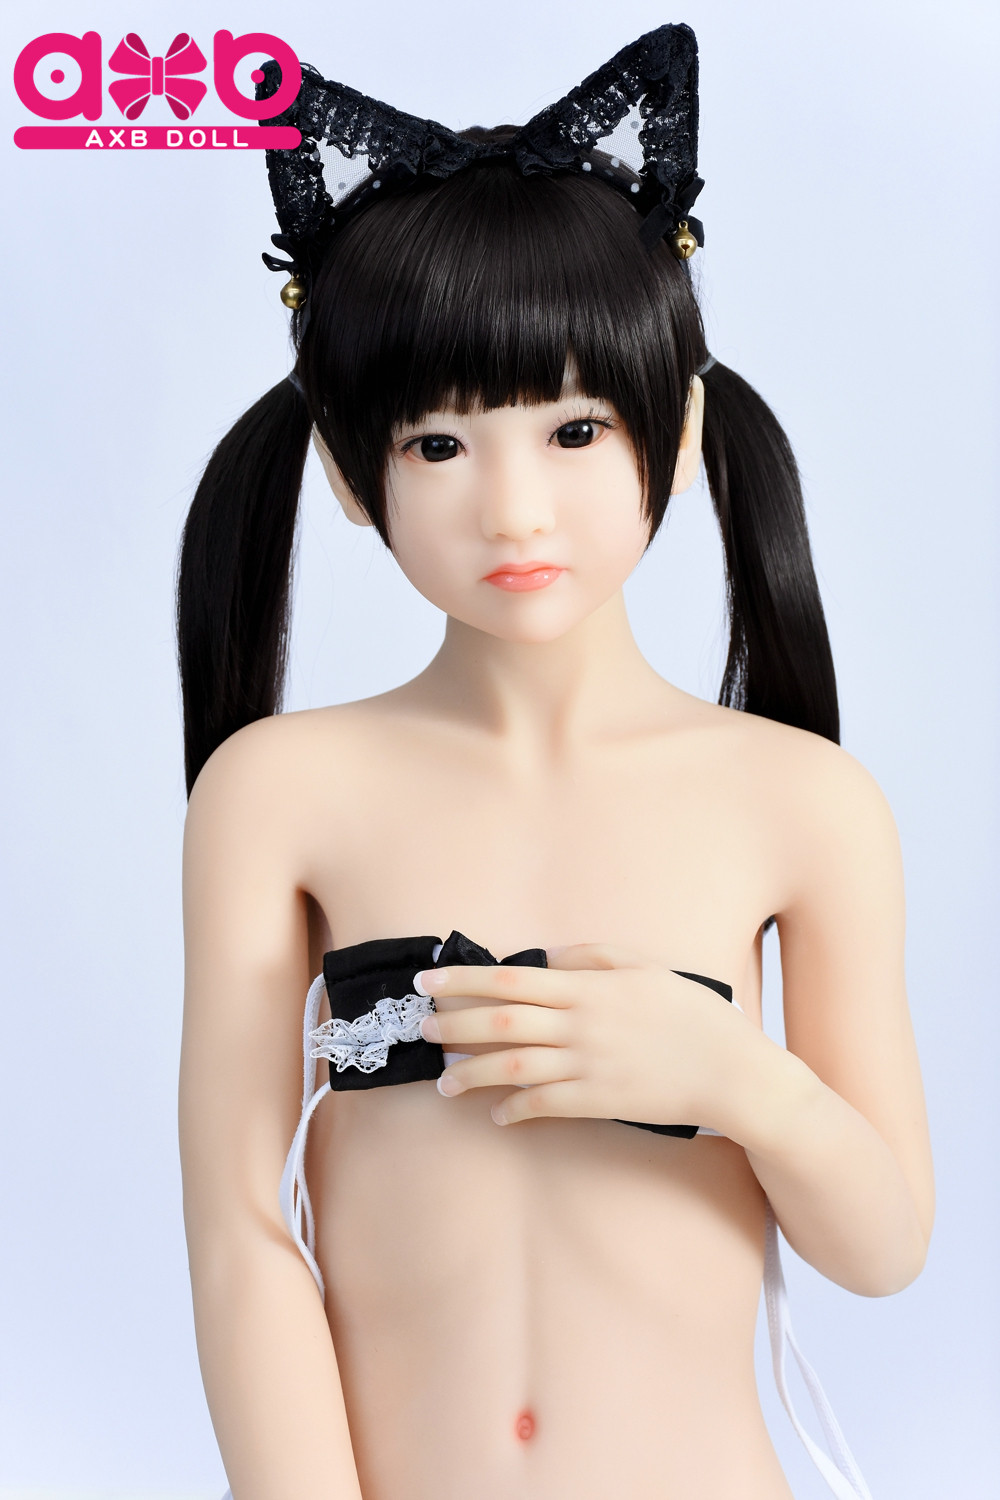 AXBDOLL A15# A-Cup TPE Sex Doll Full Body Love Dolls For Men - Click Image to Close